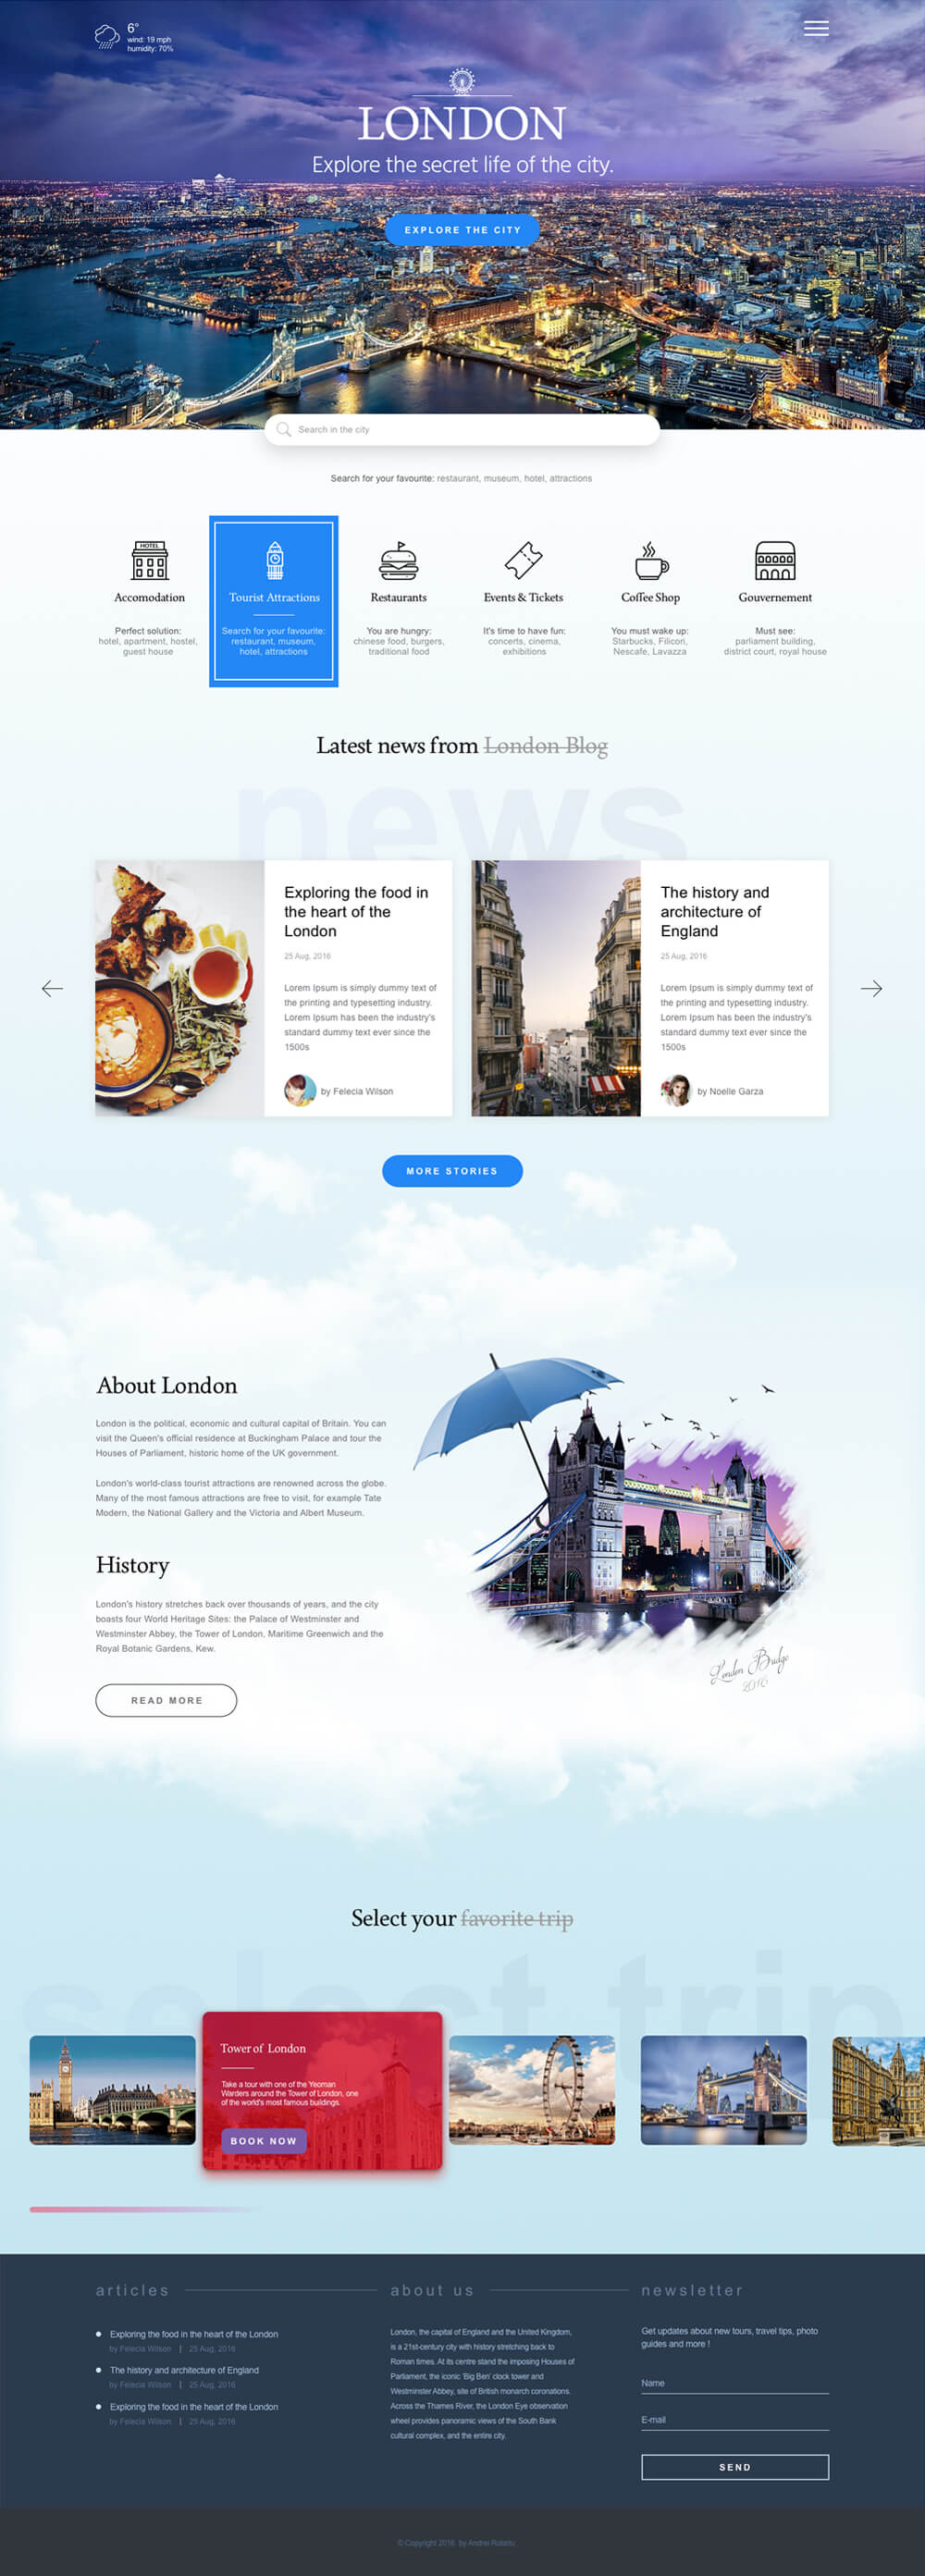 explore-the-city-landing-page-full